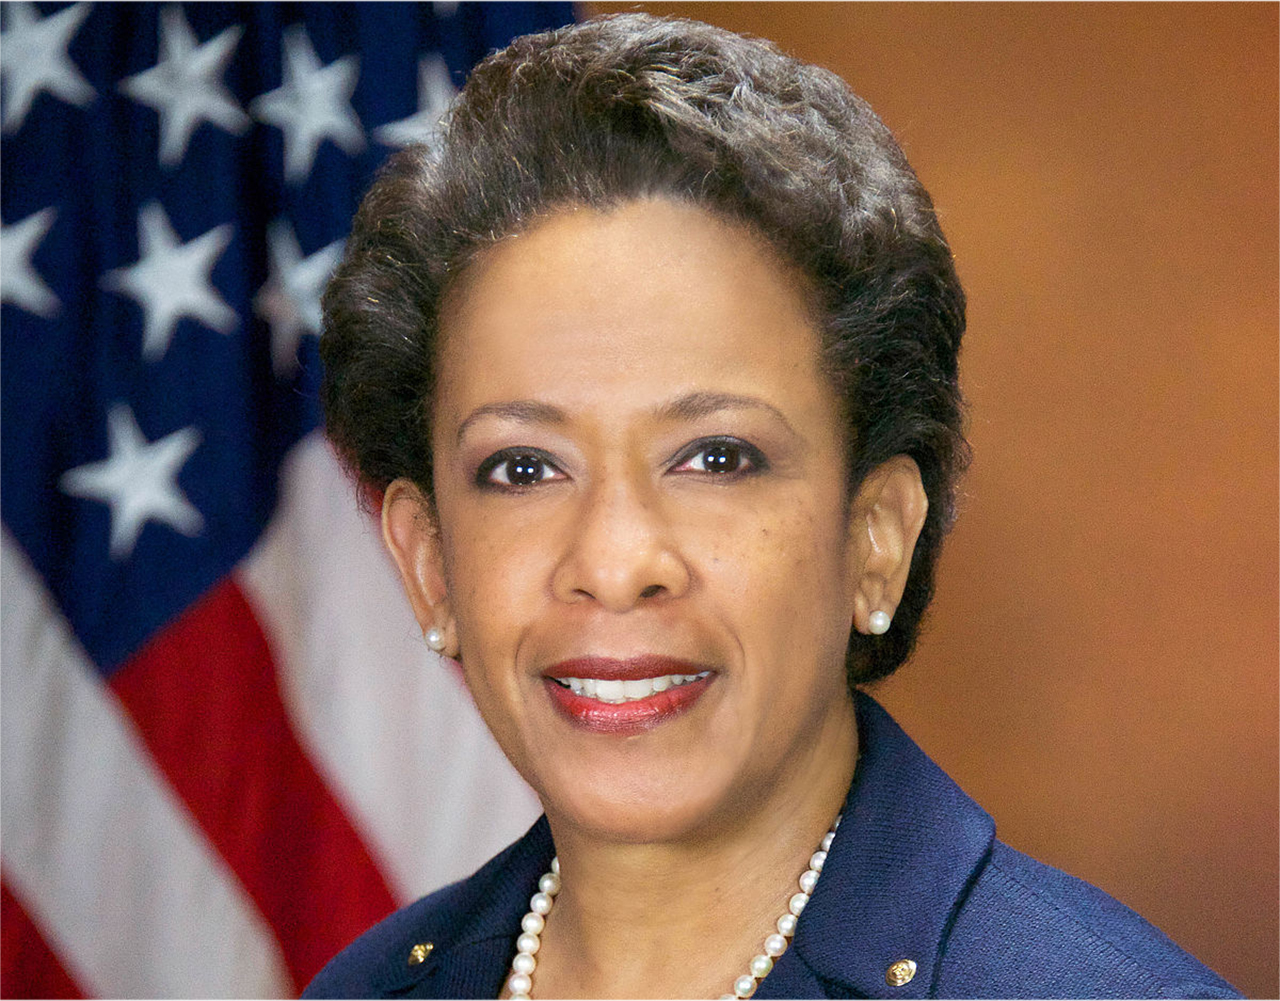 Former U.S. Attorney General Loretta E. Lynch standing in front of an American flag.